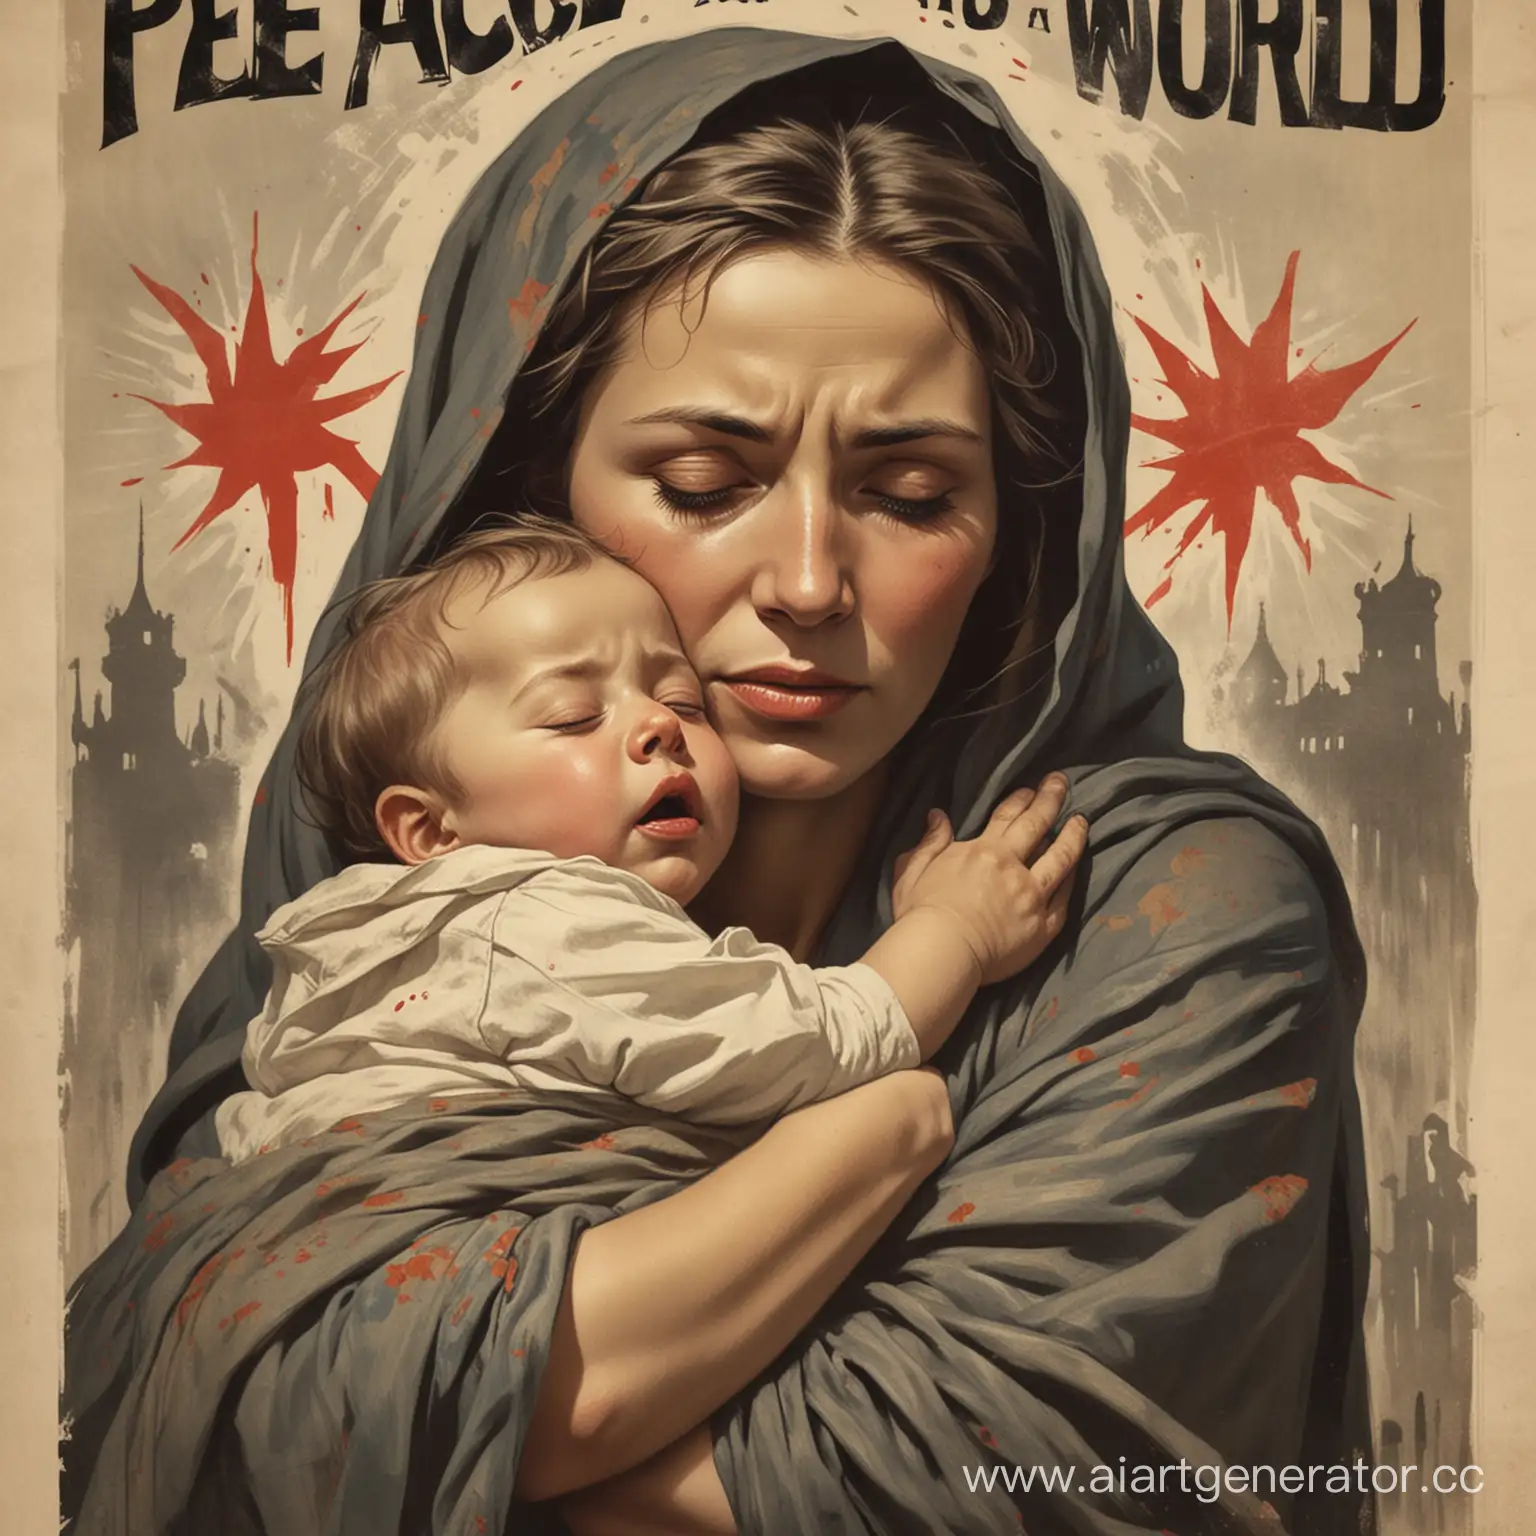 Peace-to-the-World-Poster-with-Weeping-Woman-Holding-Child